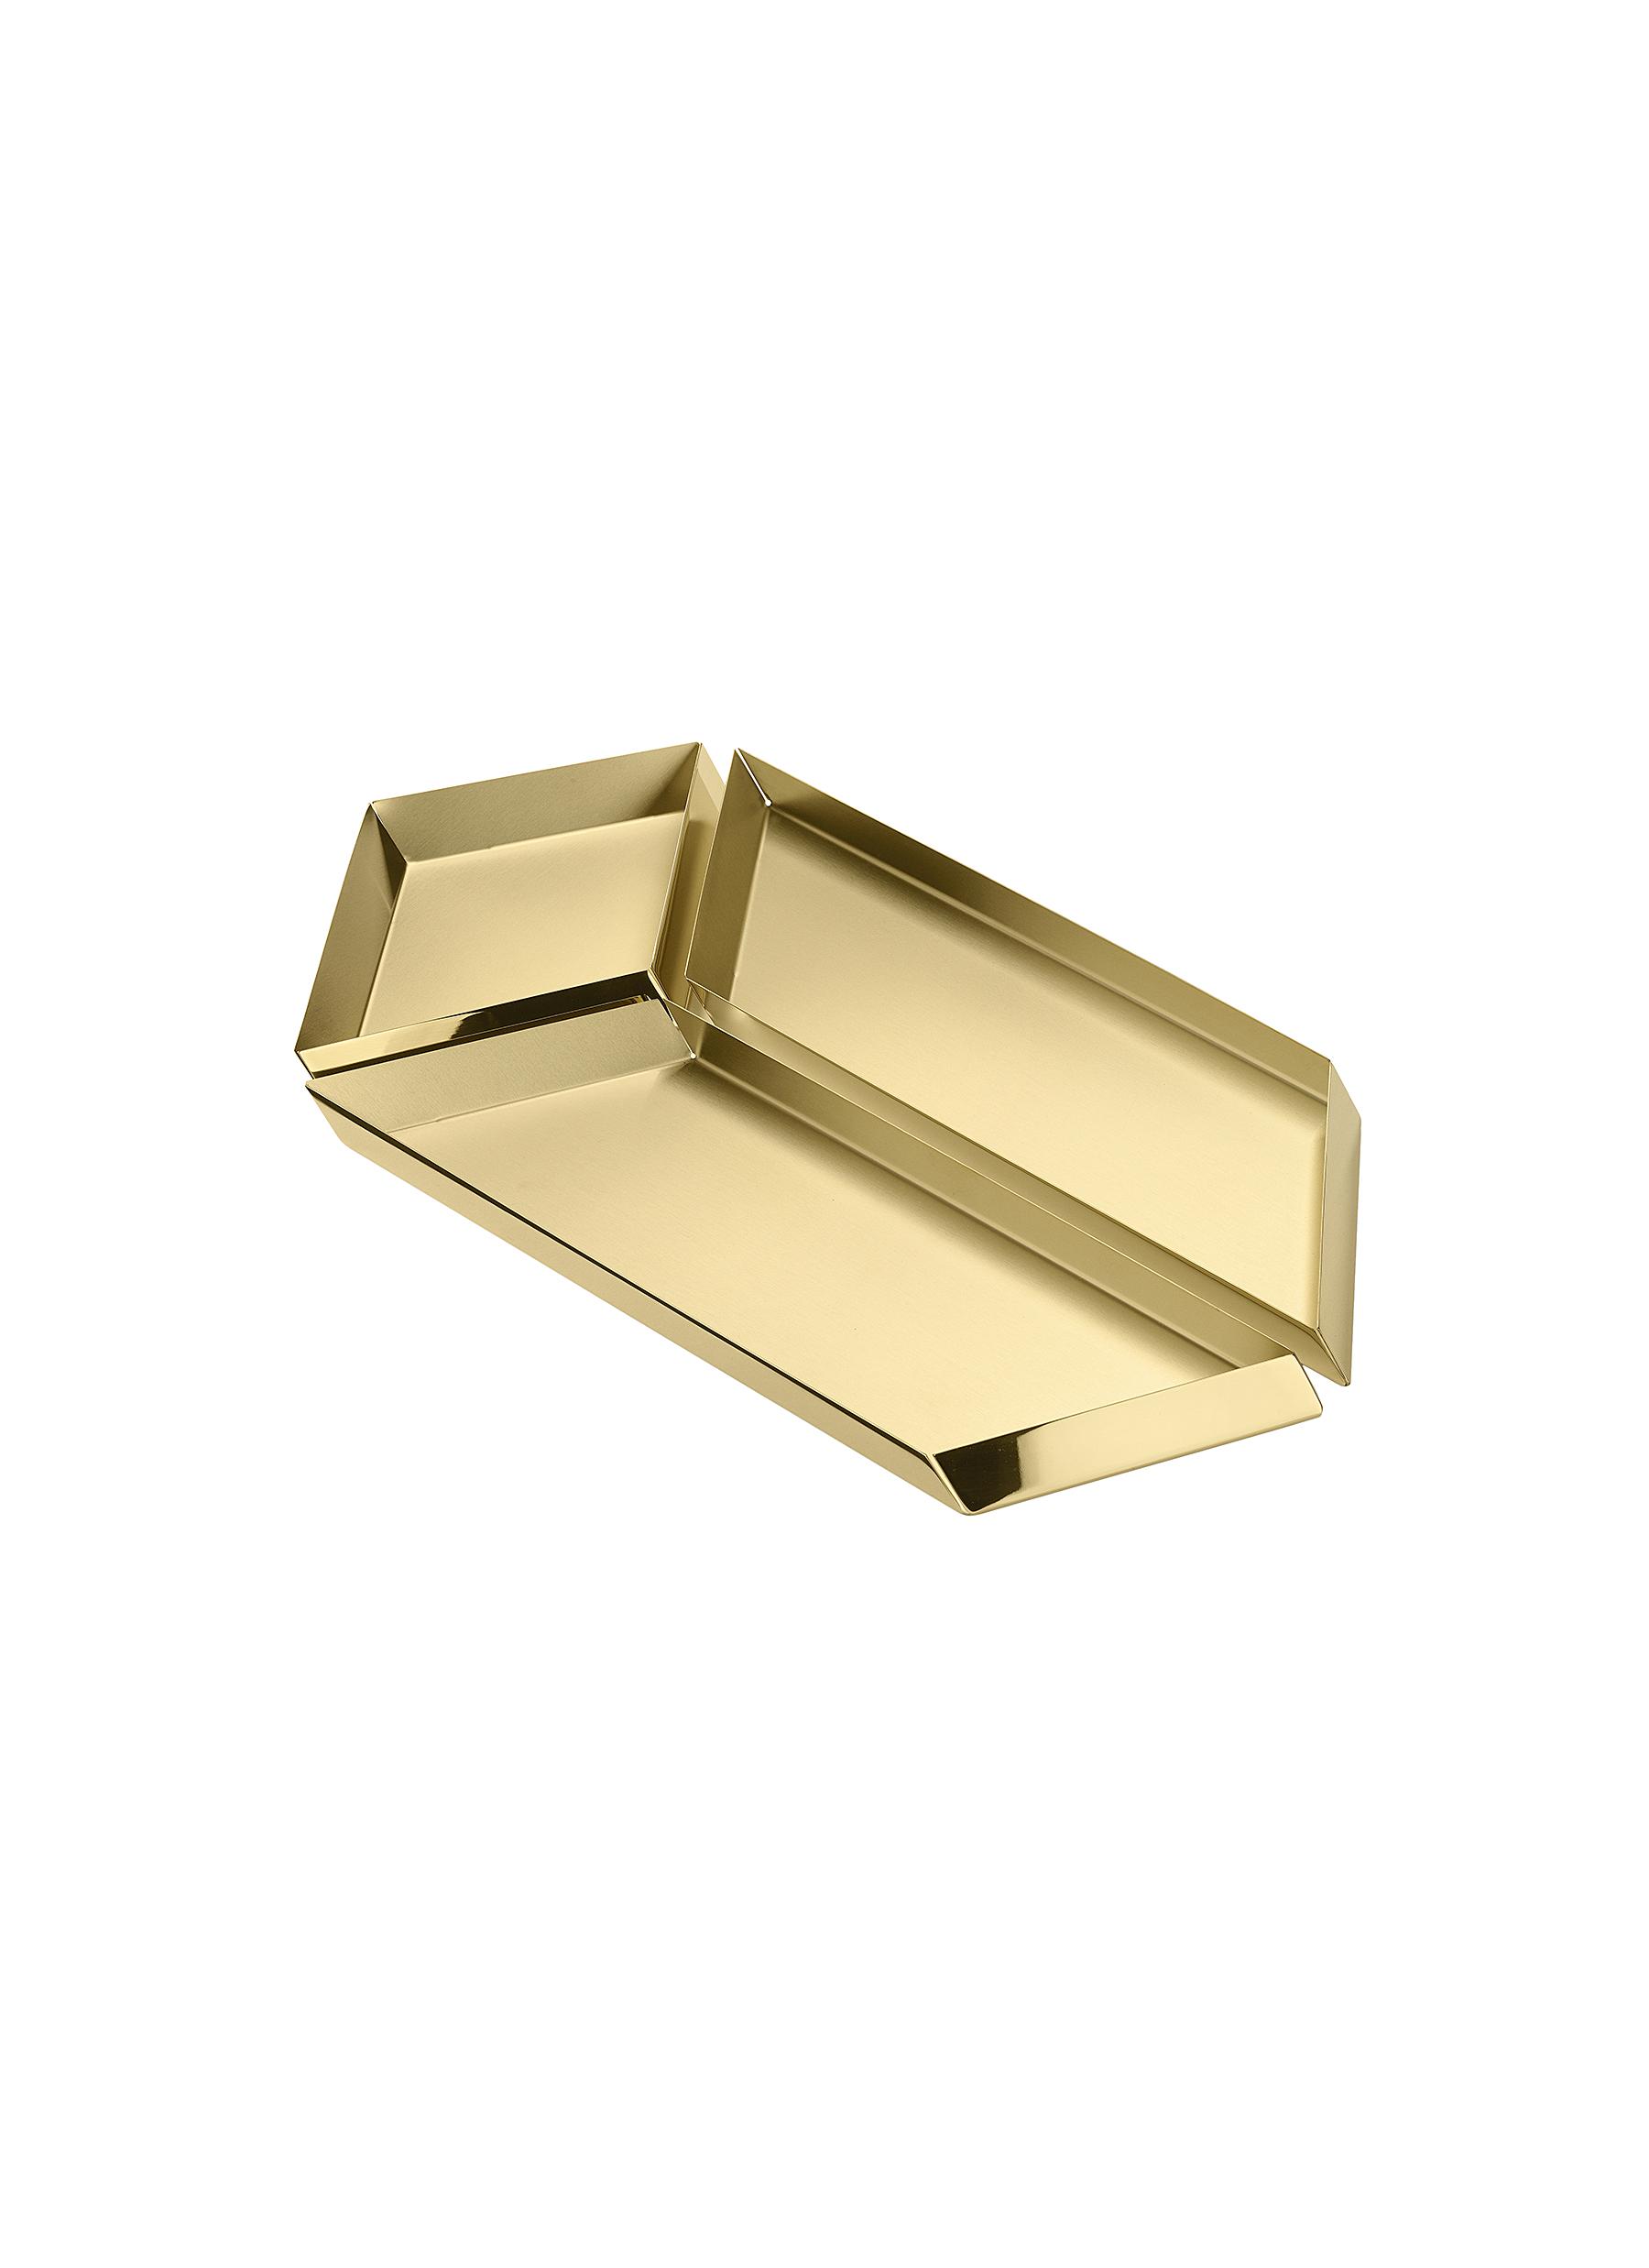 Ghidini Axonometry Large Parallelepiped Trays Set - Polished Brass